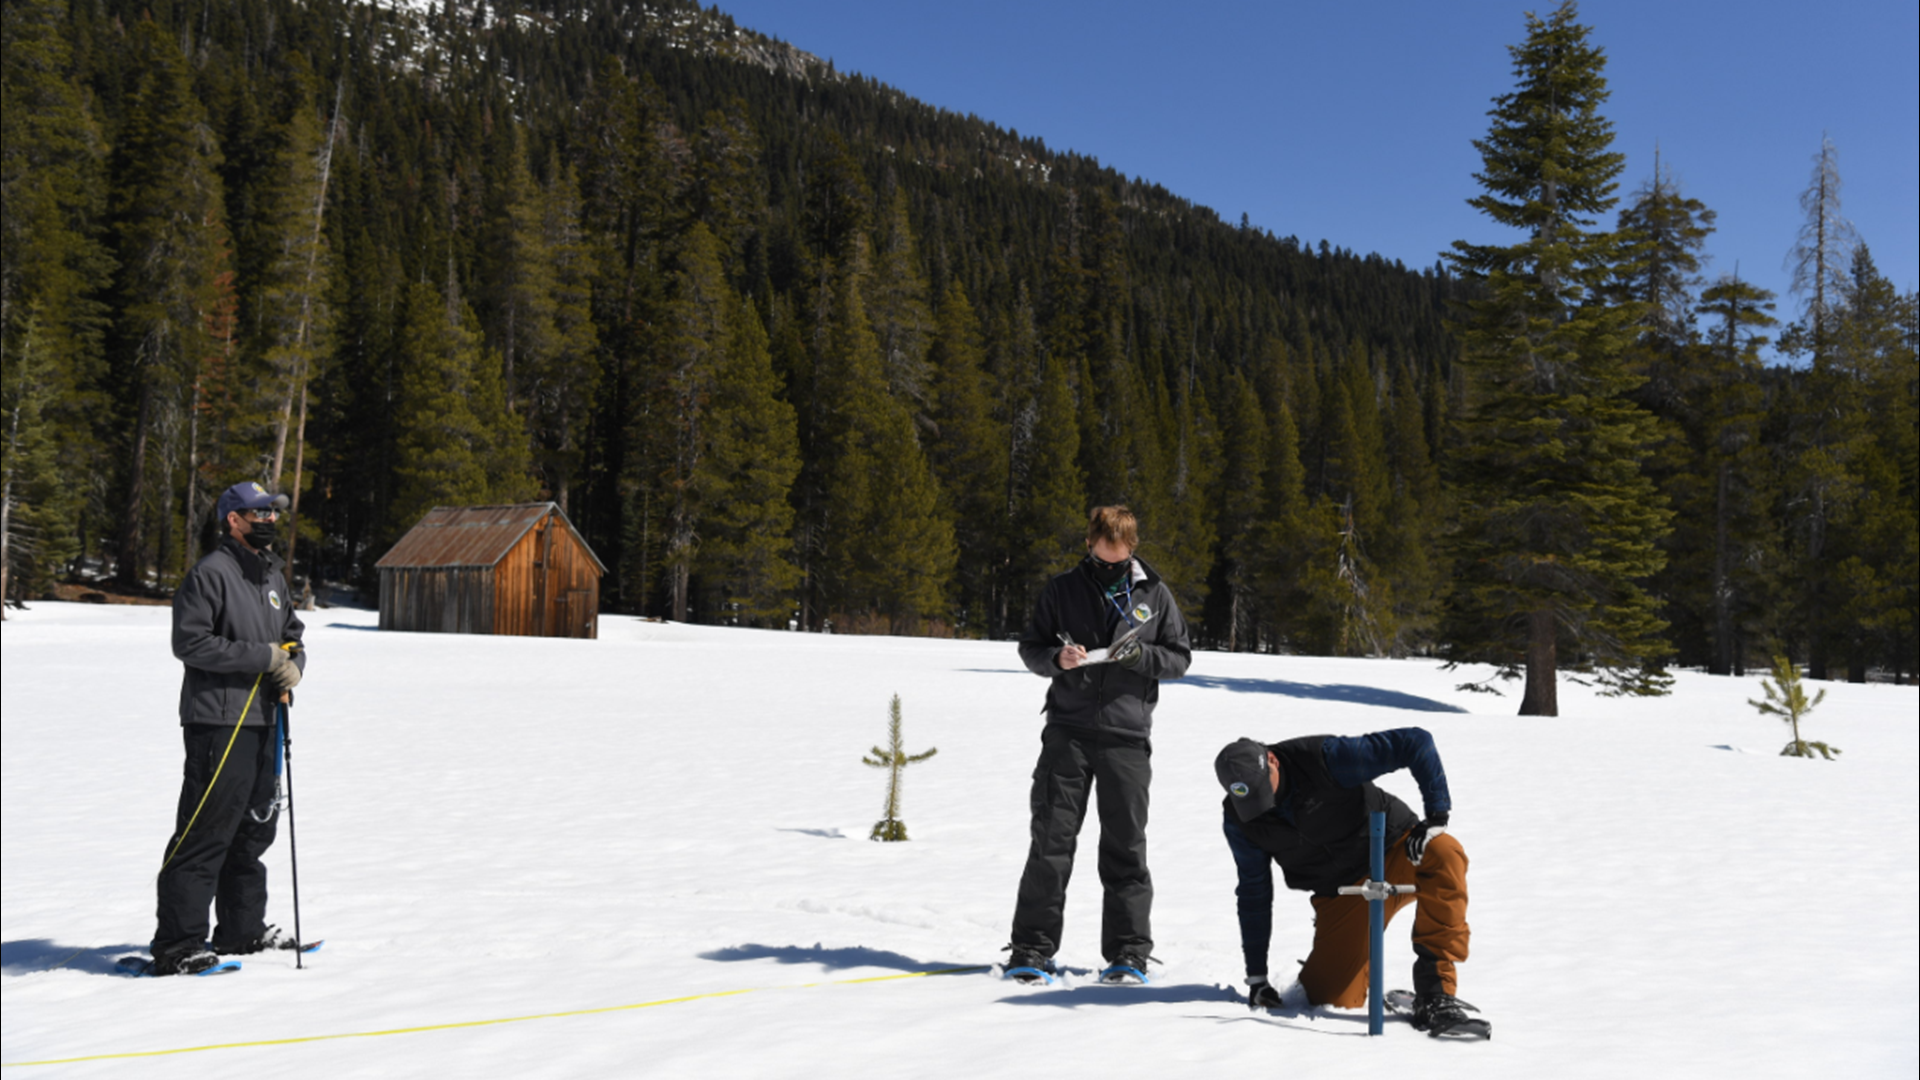 Snowpack statewide is only at 59% of its April 1 average, based on electronic measurements according to the California Department of Water Resources.